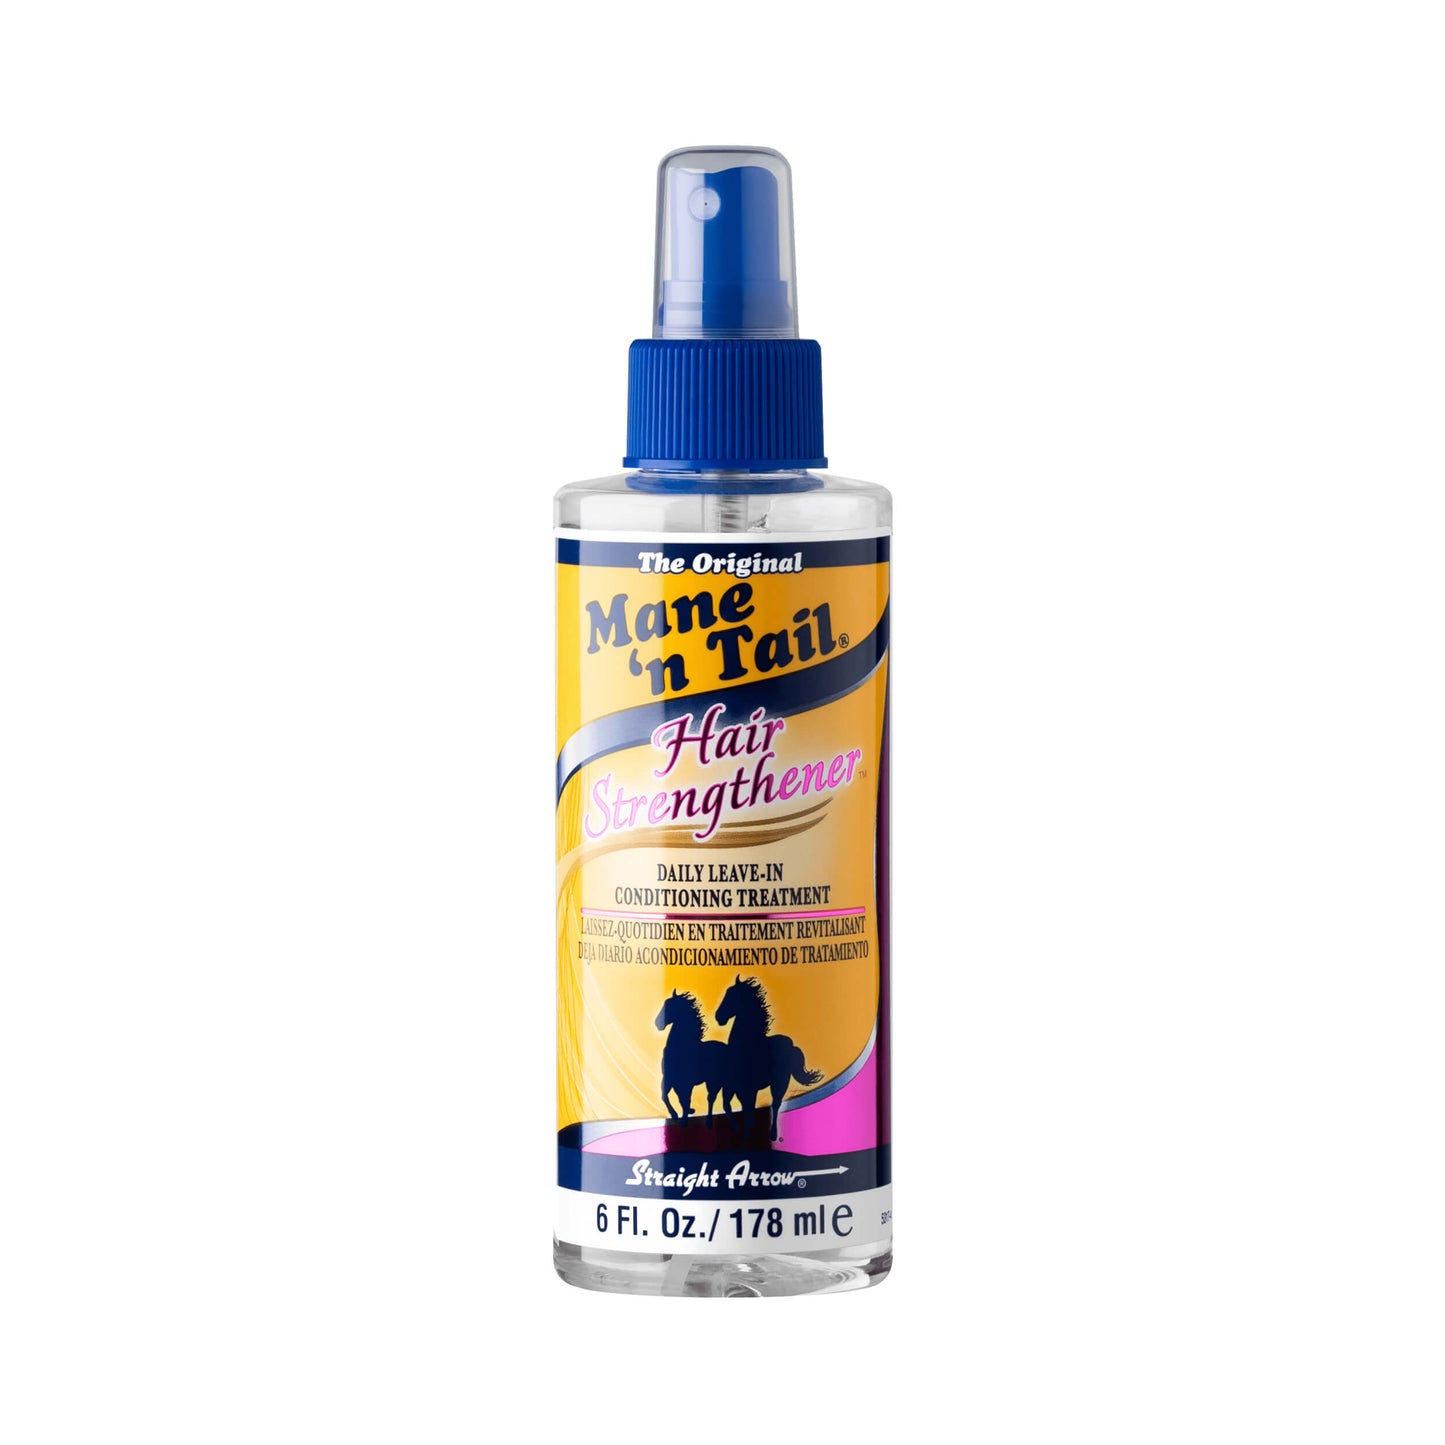 Mane ‘n Tail Hair Strengthener Daily Leave-In Conditioning Treatment 178 mL